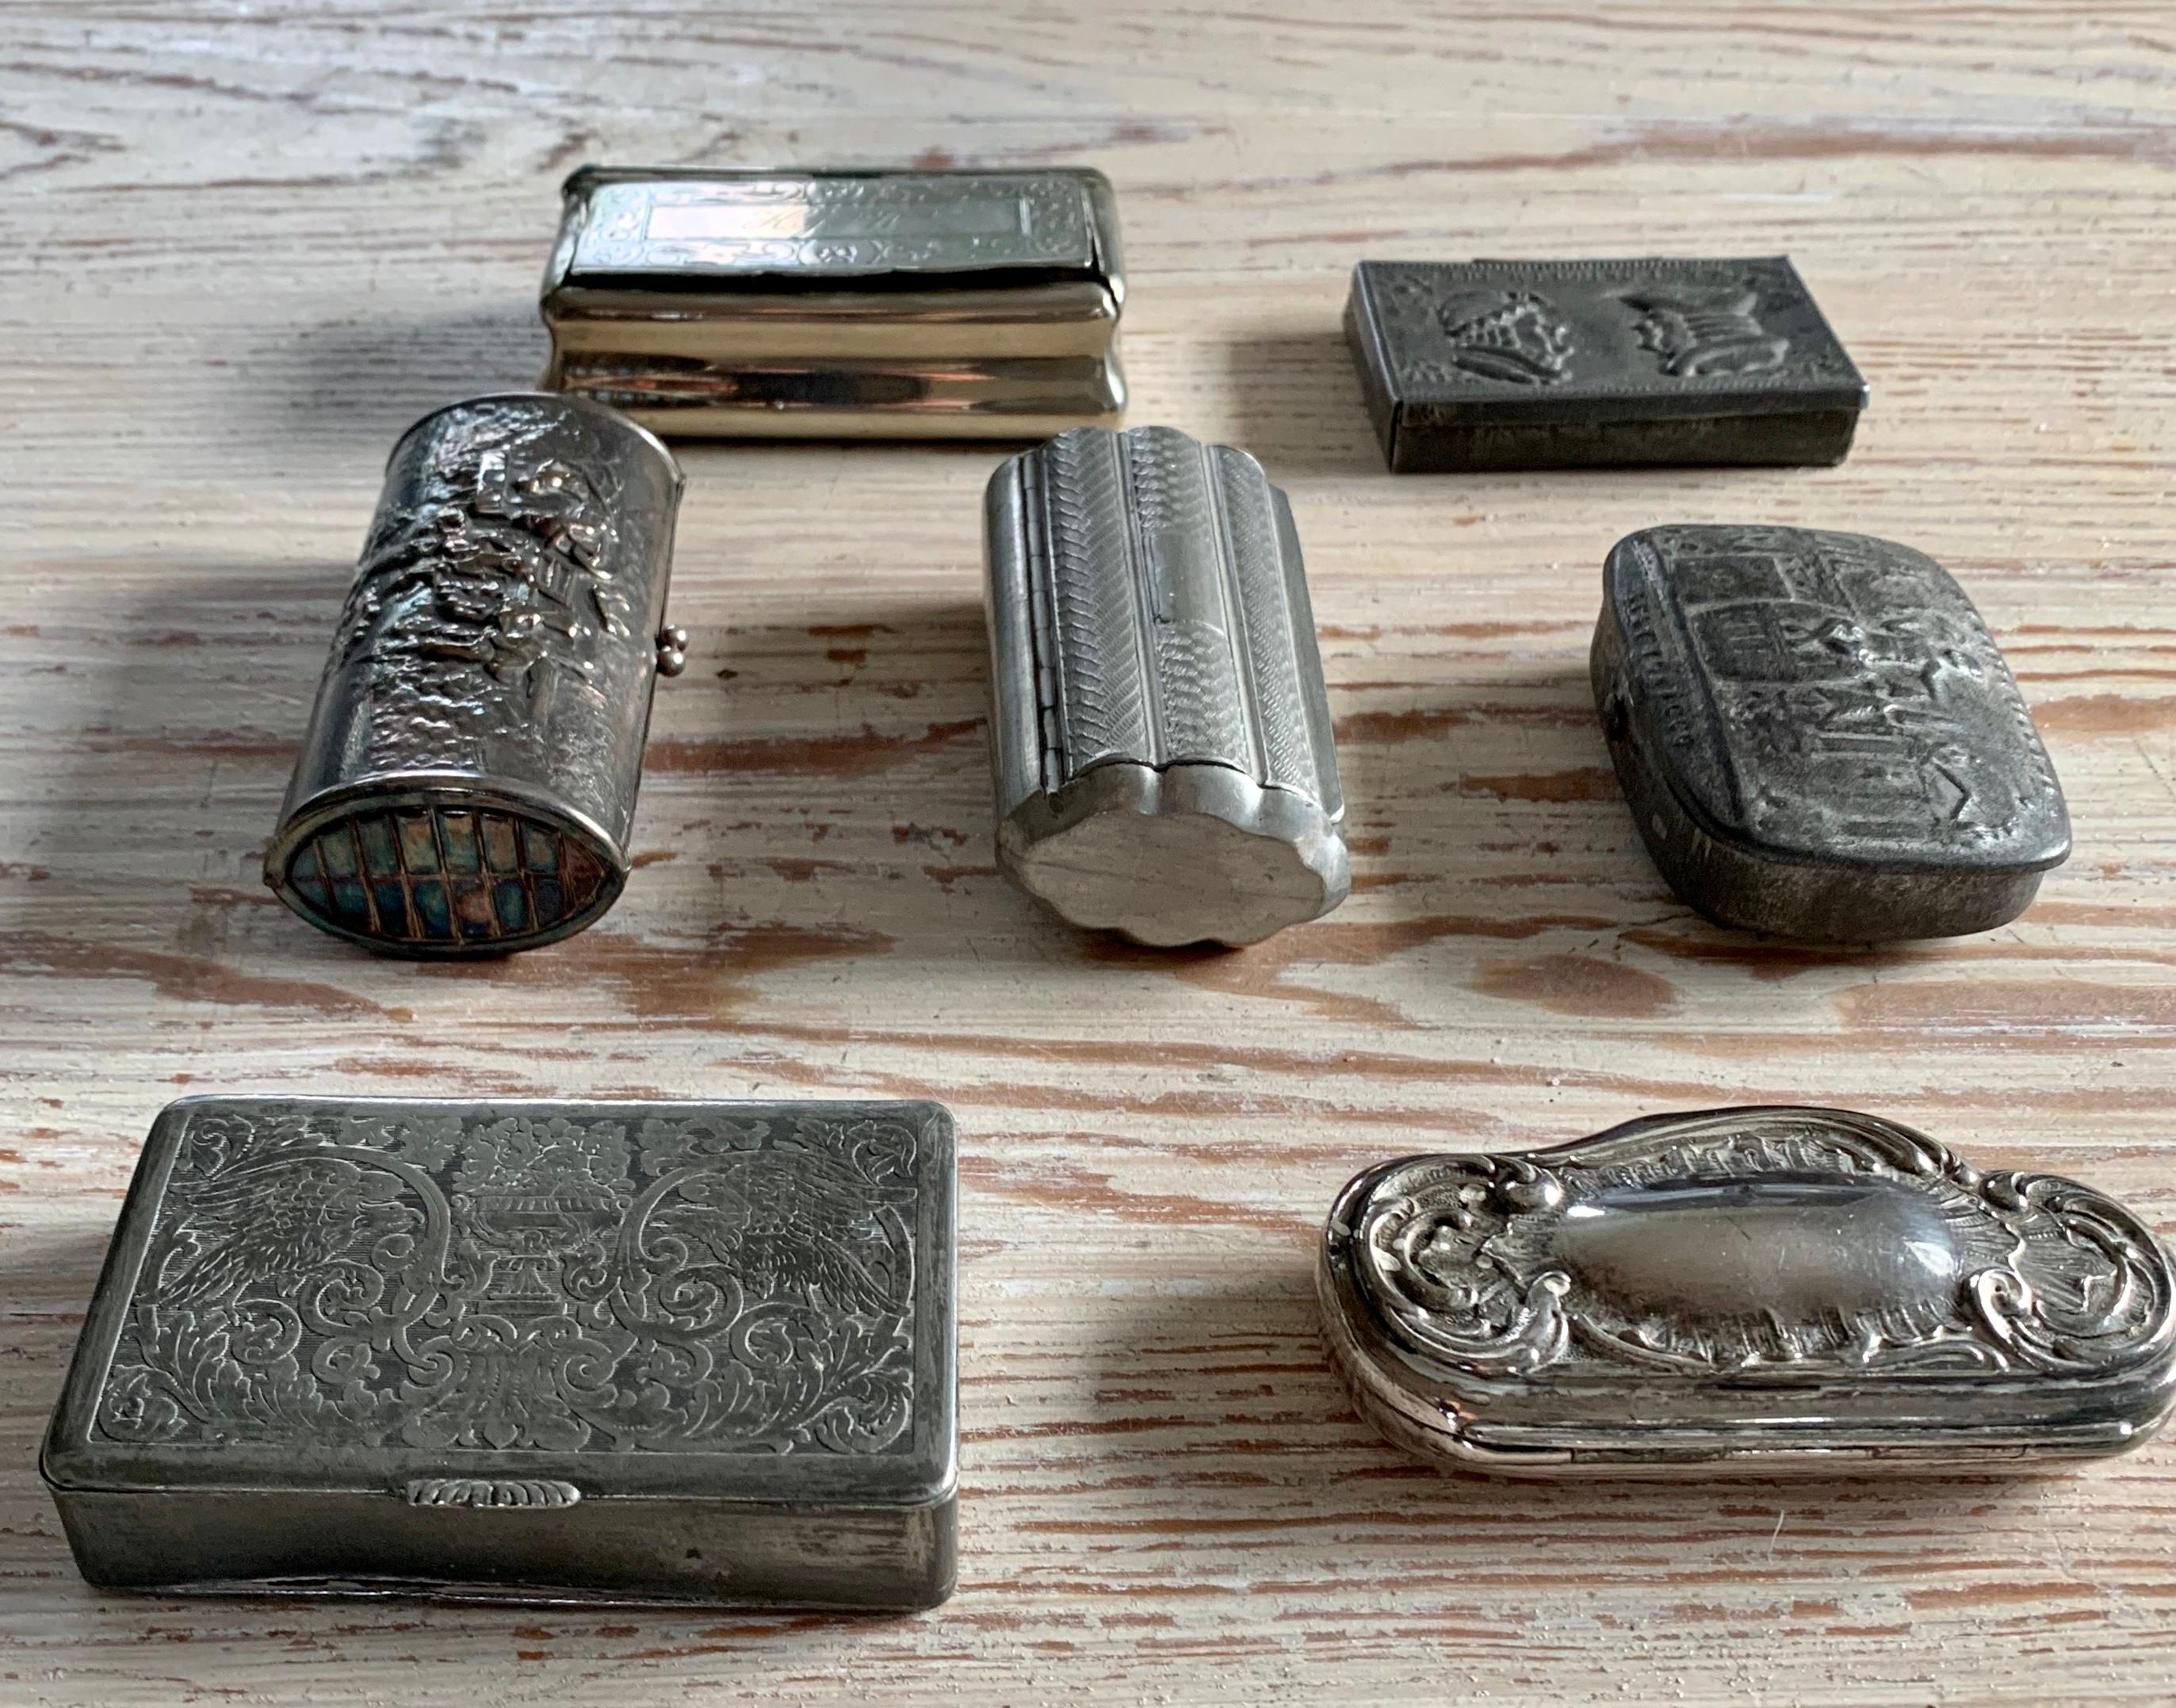 A curated collection of seven small antique boxes in variation of different metals.
The collection includes: 
- One pewter box illustrating a double faced married couple including the text 